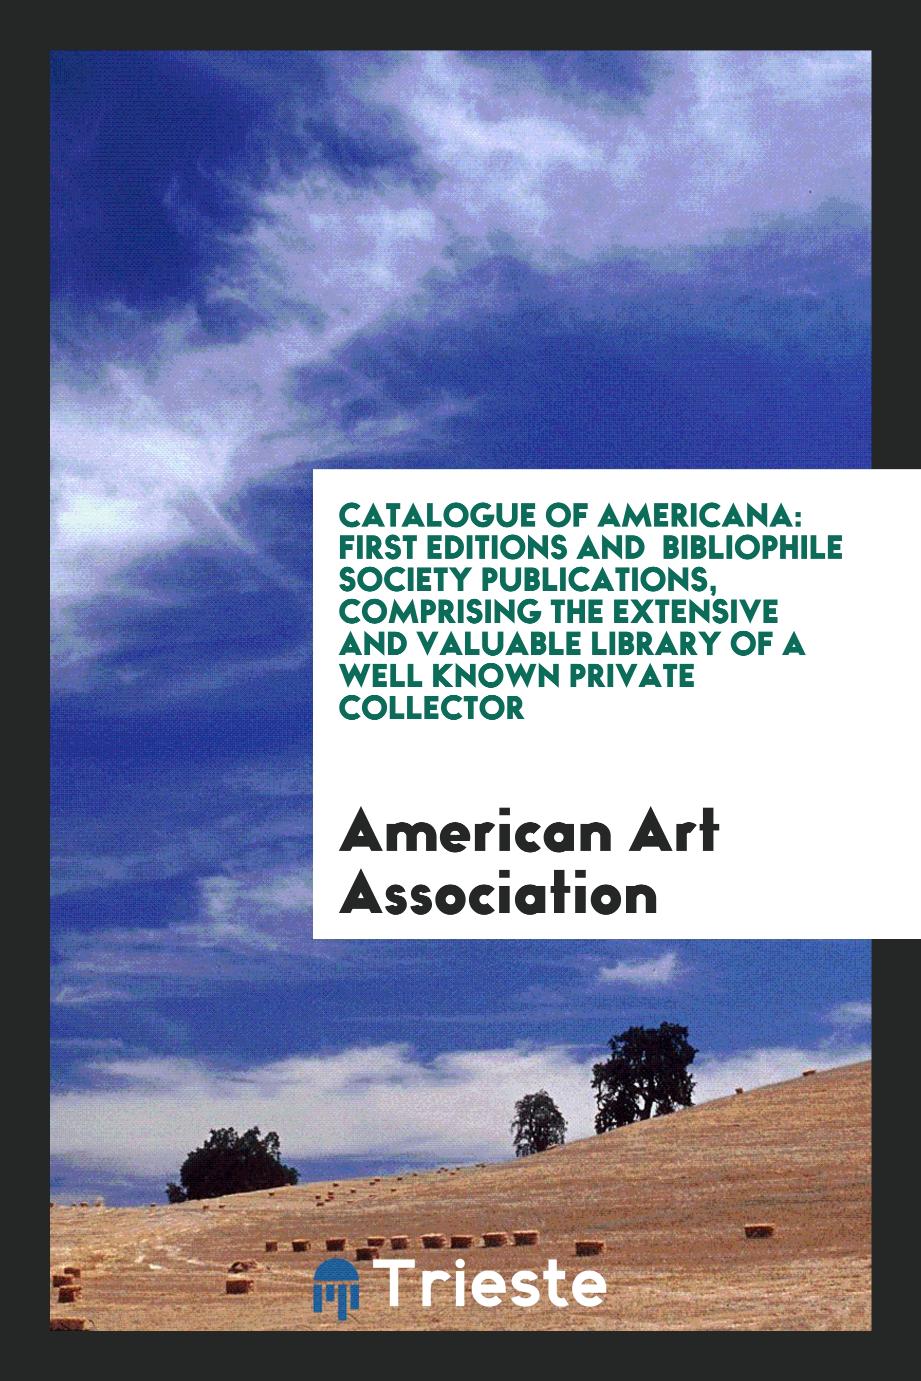 Catalogue of Americana: First Editions and Bibliophile Society Publications, Comprising the extensive and valuable library of a well known private collector